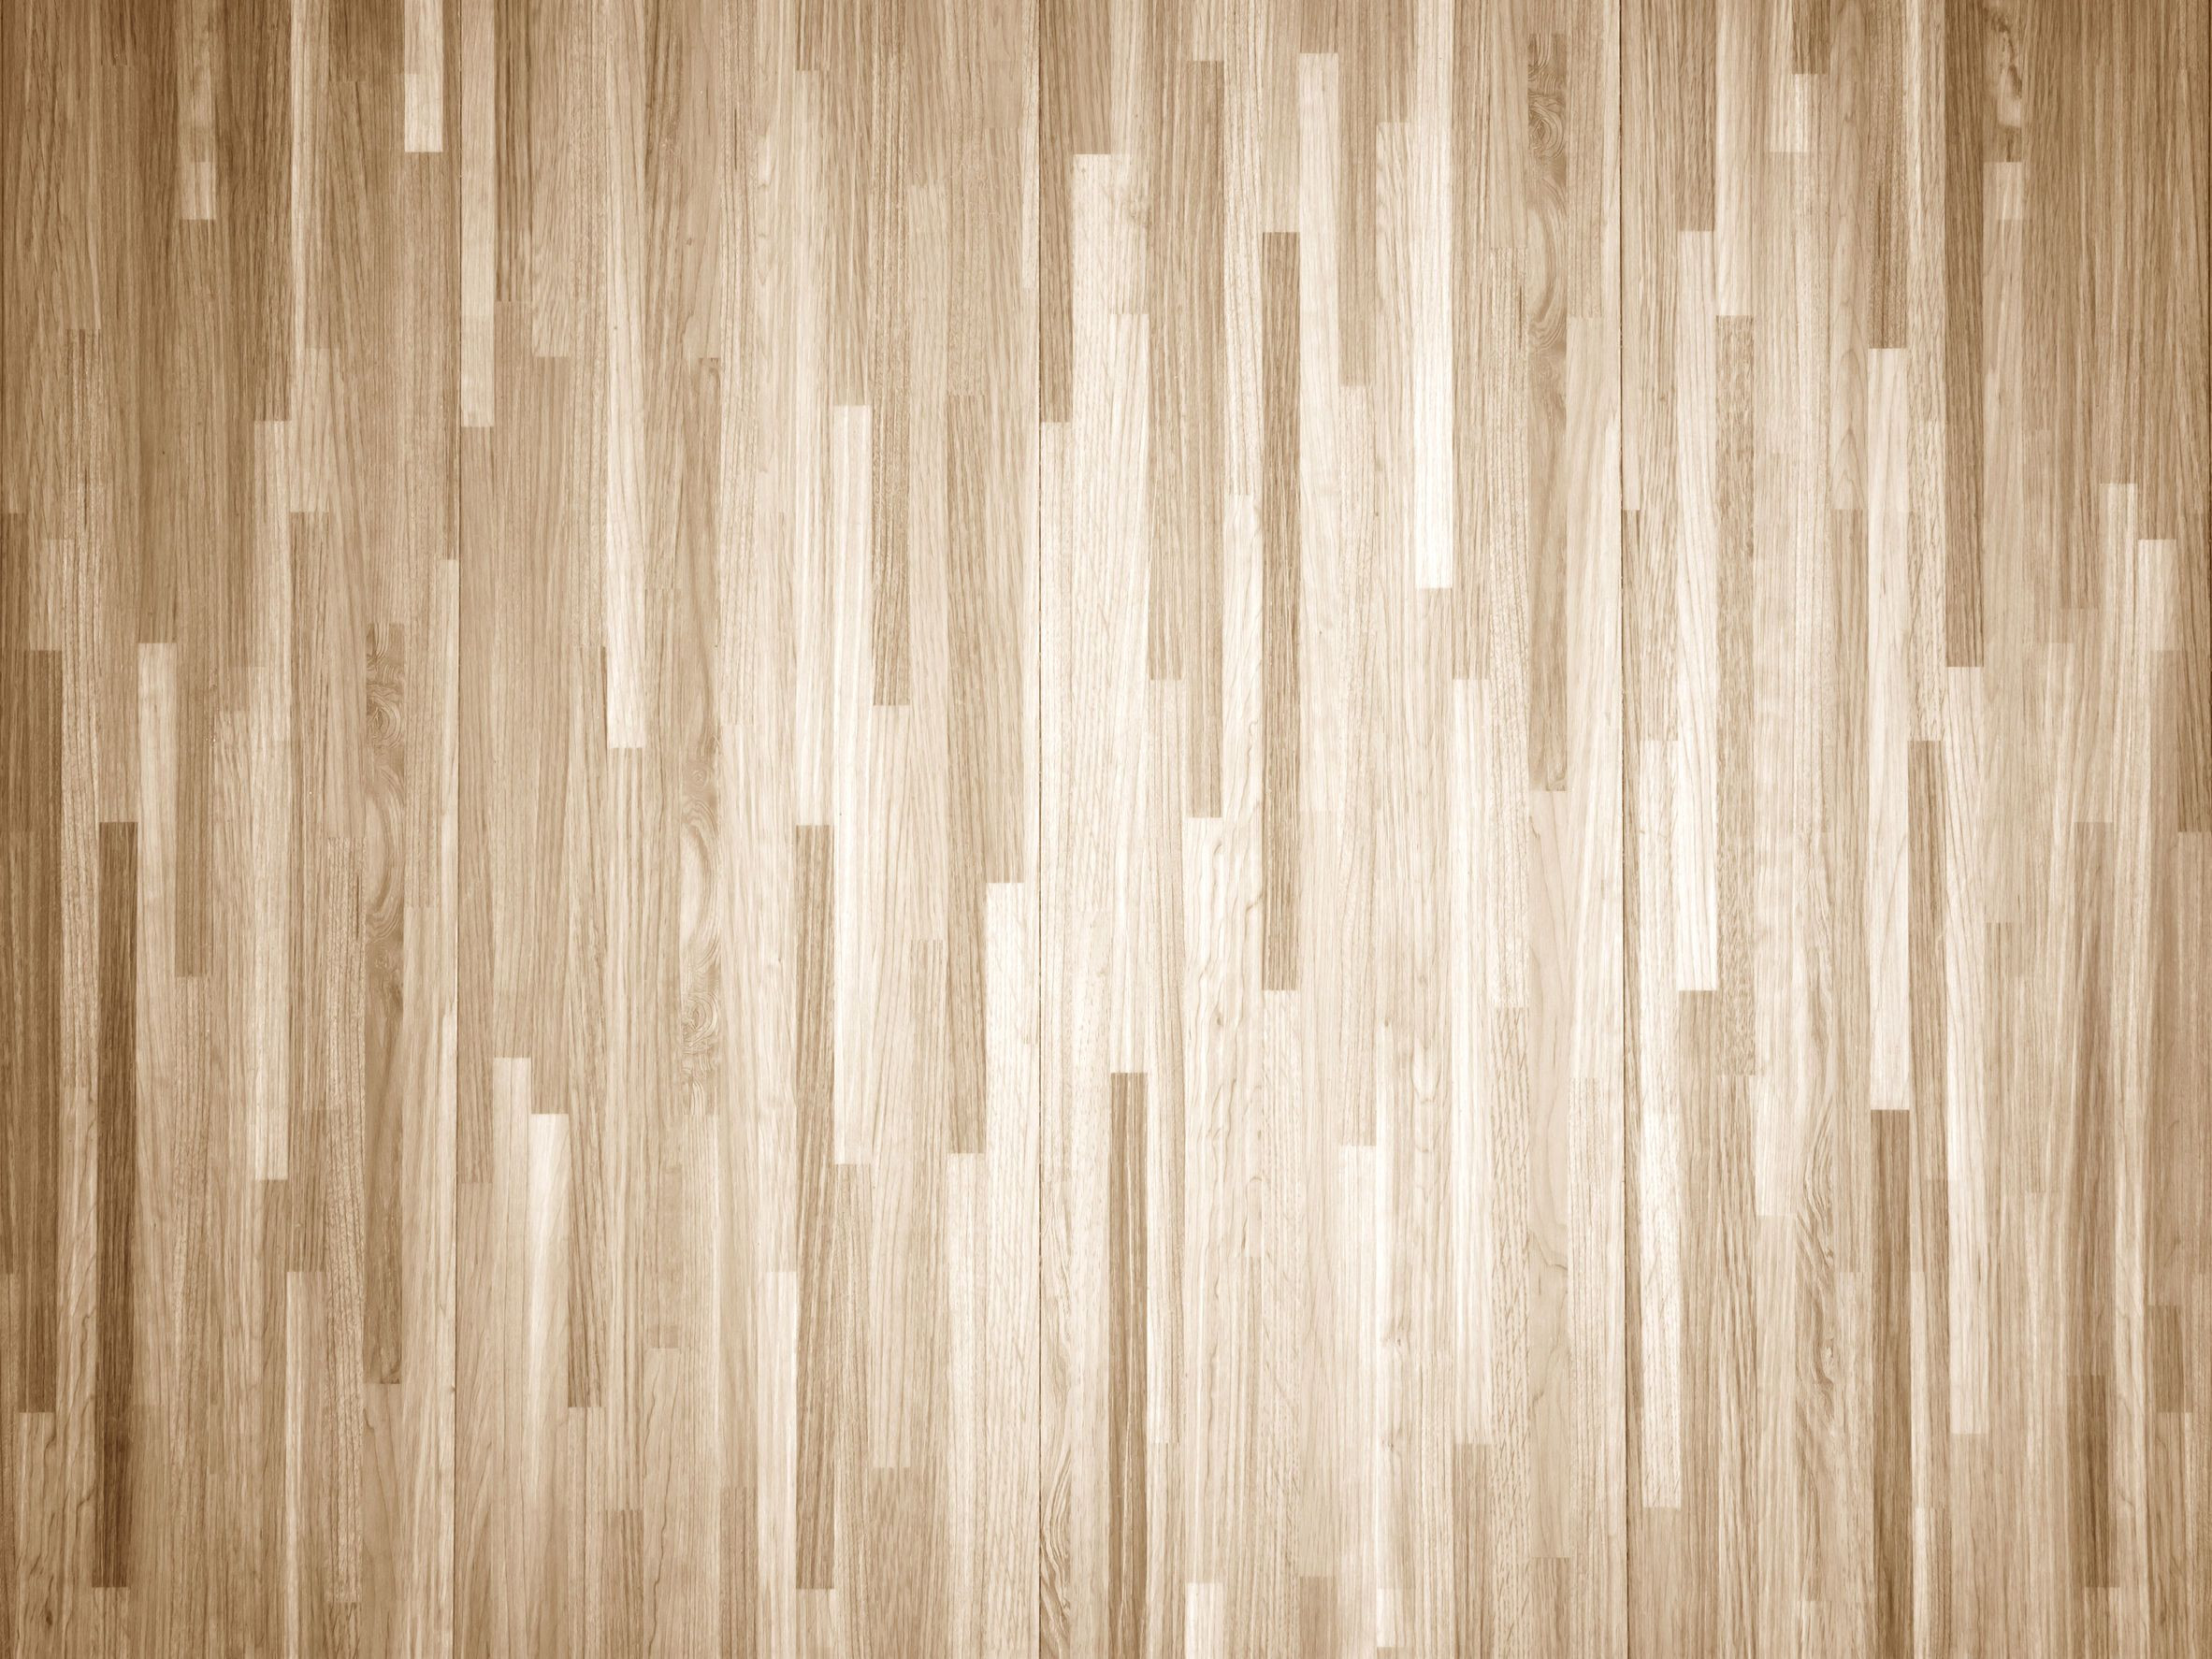 17 Unique Sanding and Restaining Hardwood Floors Cost 2024 free download sanding and restaining hardwood floors cost of how to chemically strip wood floors woodfloordoctor com intended for you